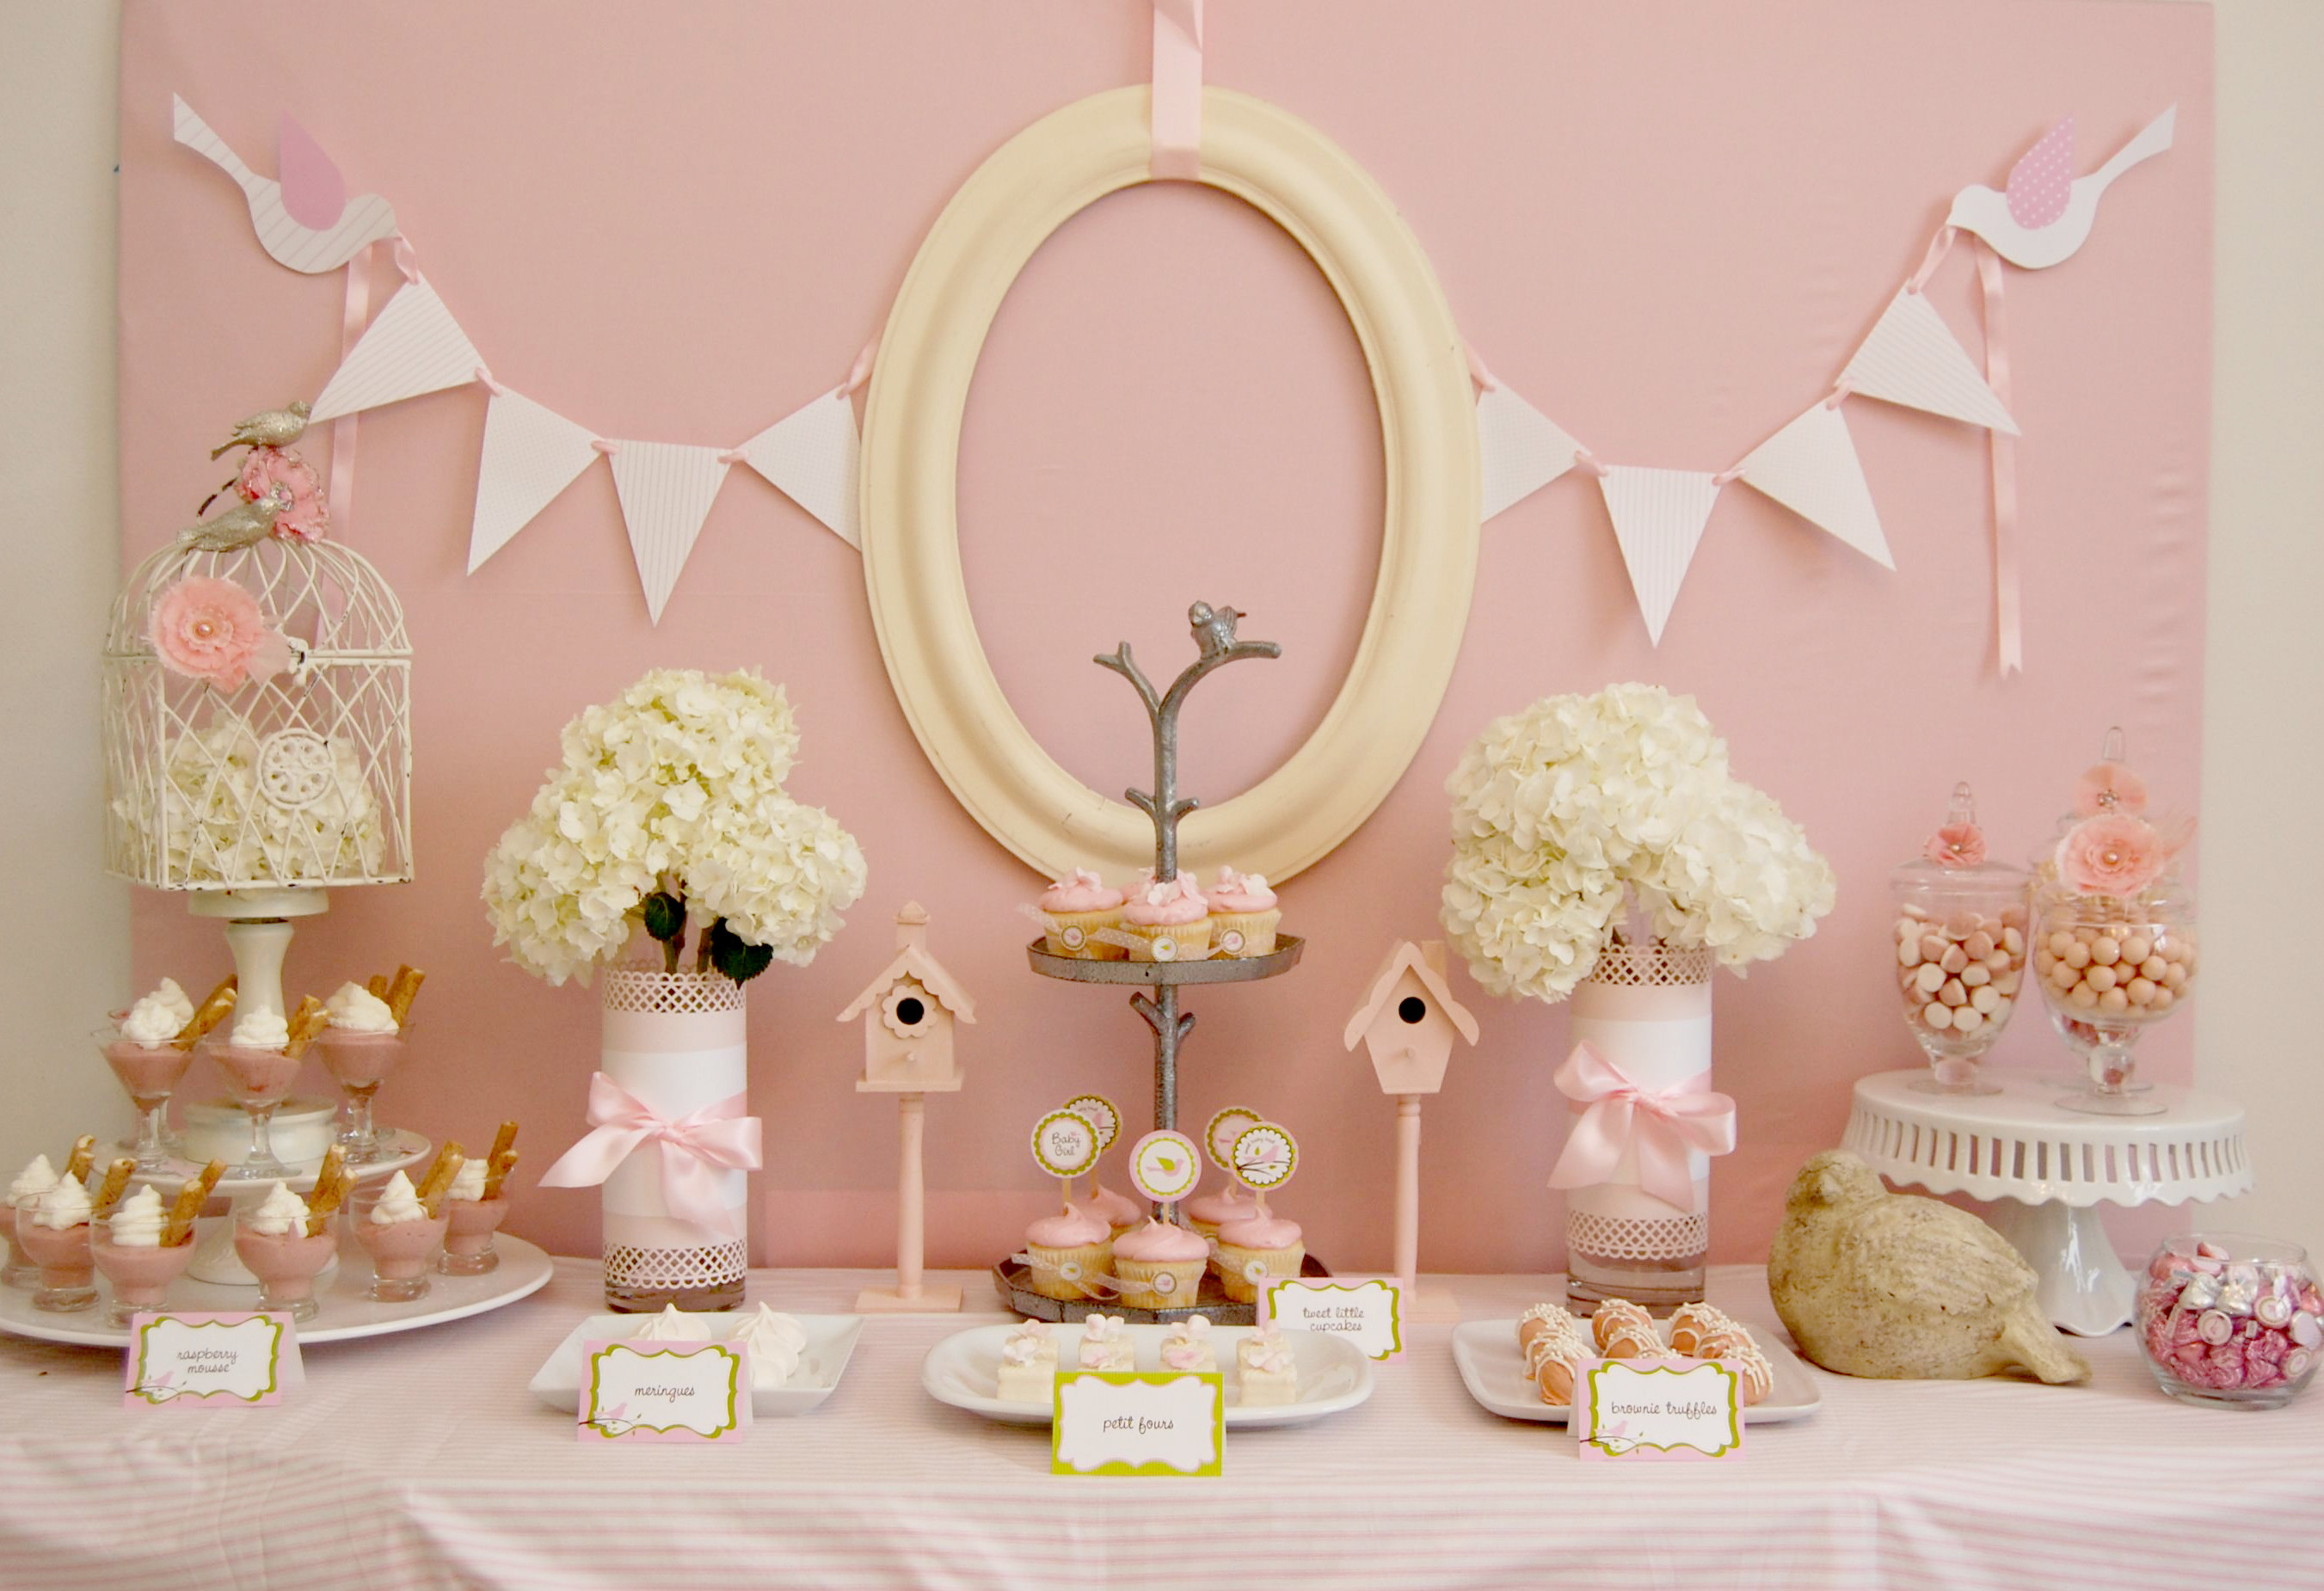 Best ideas about Baby Shower Table
. Save or Pin Real Party Little Pink Bir s Frog Prince Paperie Now.